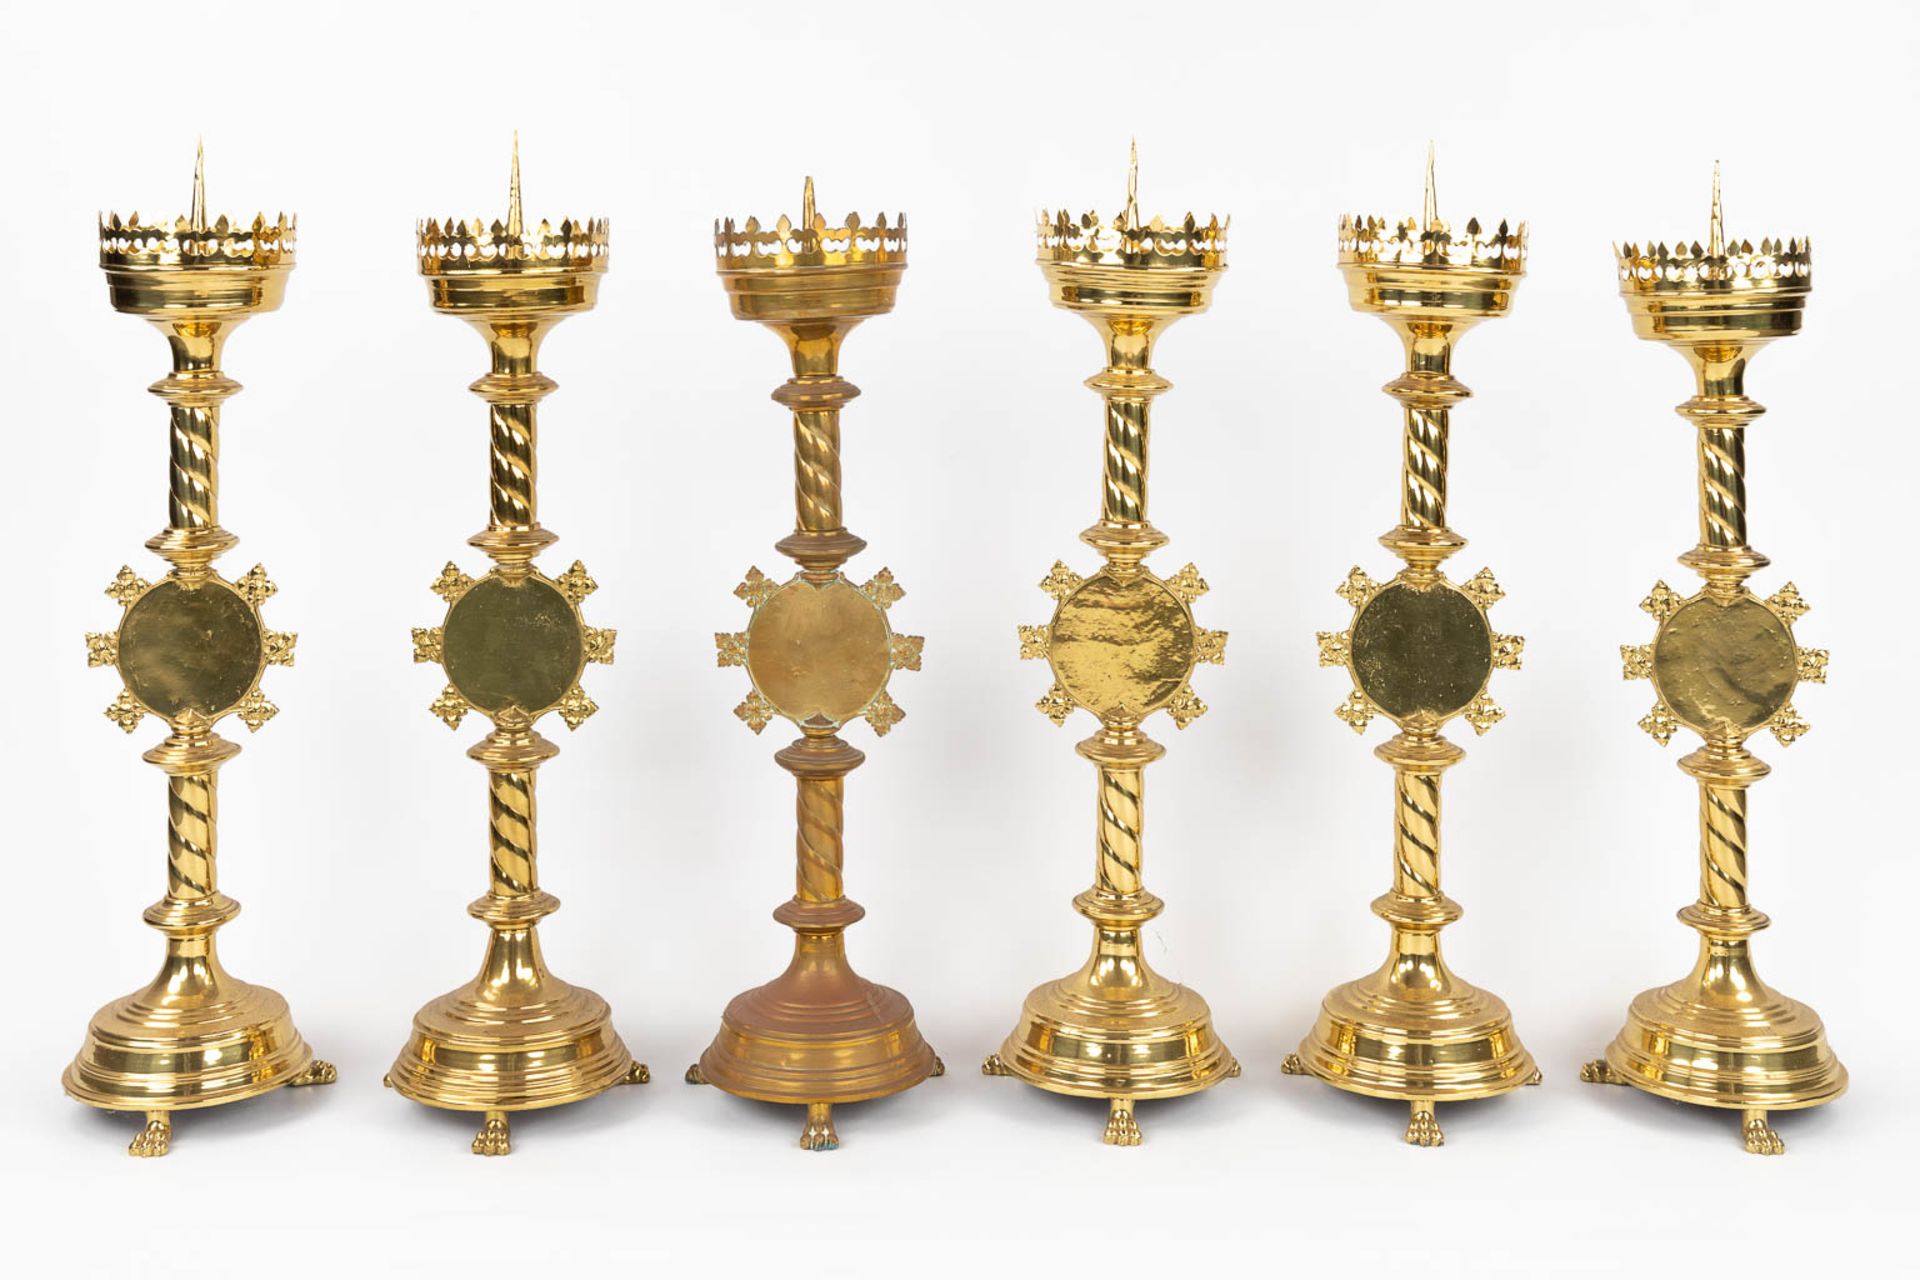 A set of 6 Church candlesticks with red IHS logo. (H:72 x D:20 cm) - Image 5 of 13